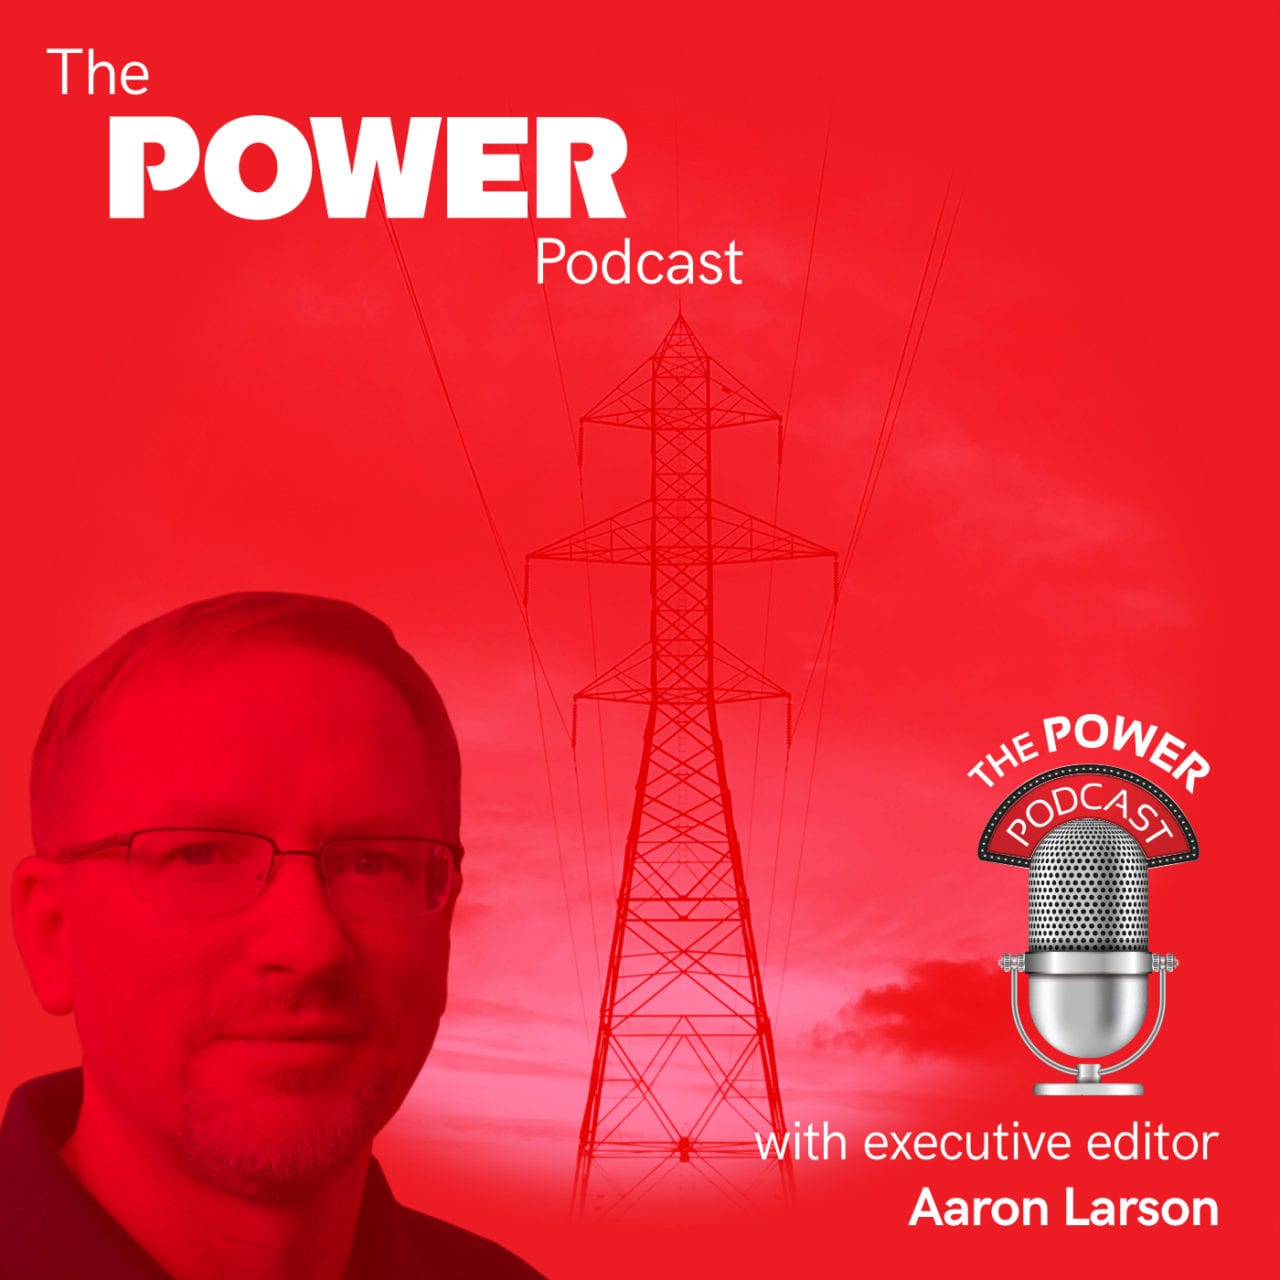 How a Major Resort Owner Manages Its Power [PODCAST]